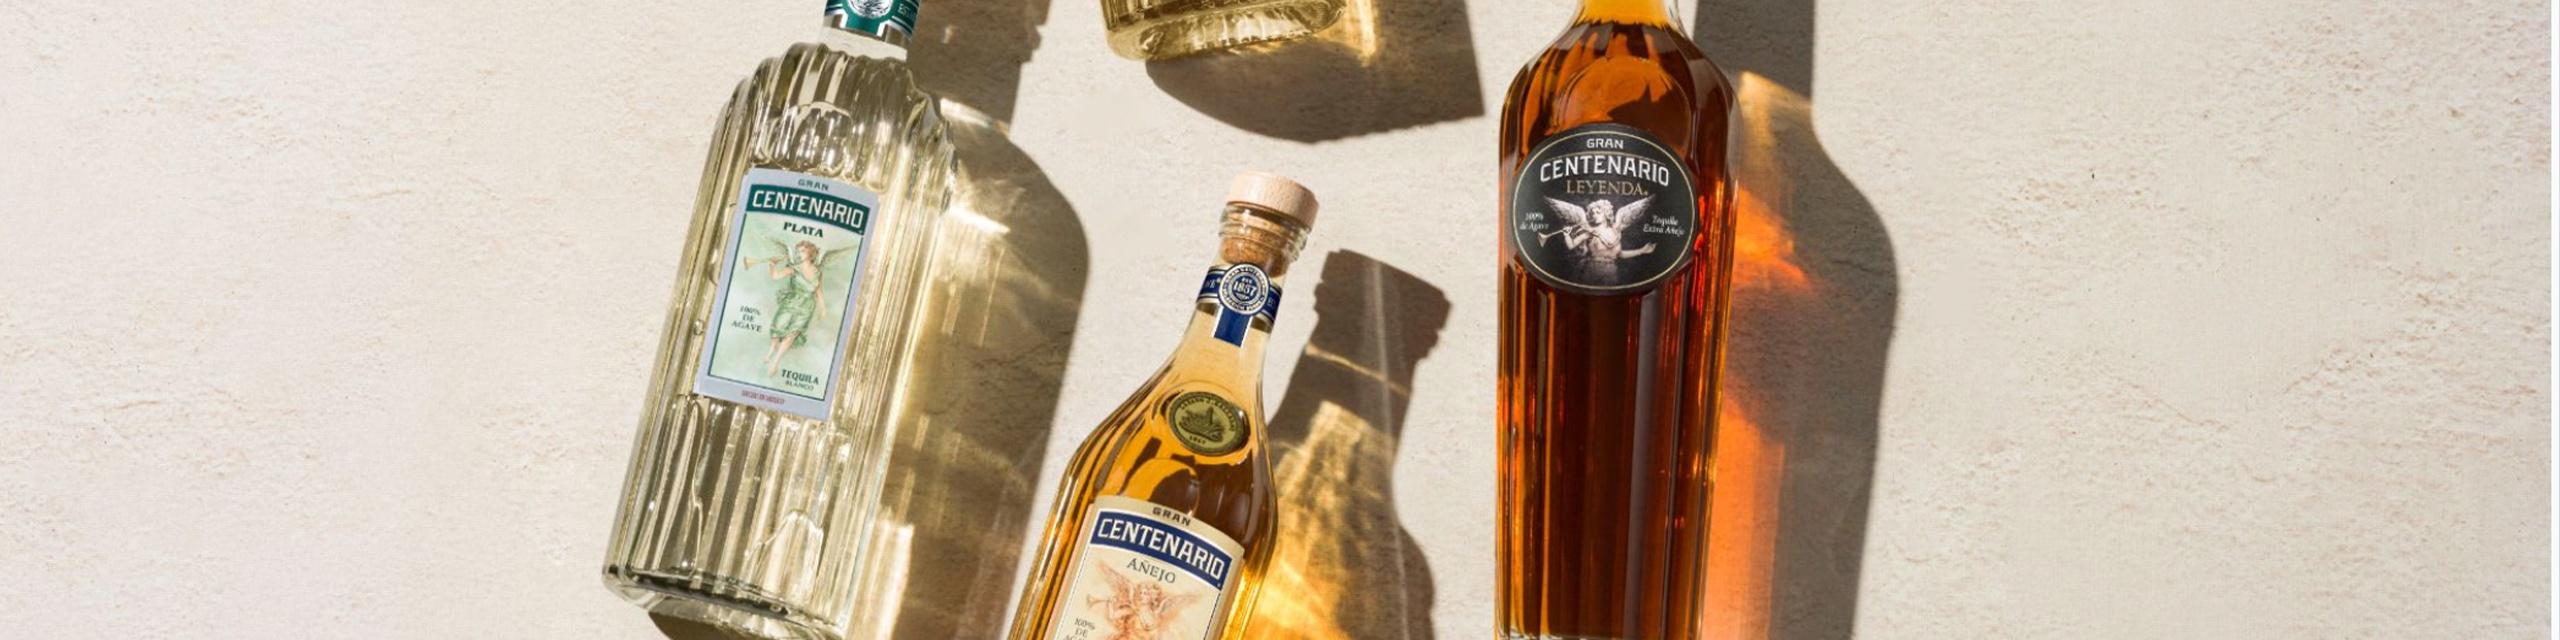 Established in 1857 by Lazaro Gallardo, Gran Centenario® is an award-winning, 100% blue agave tequila, crafted in the highlands of Jalisco, Mexico. Gran Centenario® is renowned for using the proprietary Selección Suave process, which blends the richest and smoothest tequilas to yield a smooth, complex taste profile. Mexico’s #1 tequila is available in Plata, Reposado, Añejo, and Leyenda (Extra Añejo) varieties. The brand maintains centuries-old Mexican traditions & heritage. (ABV 40% - 80 proof)